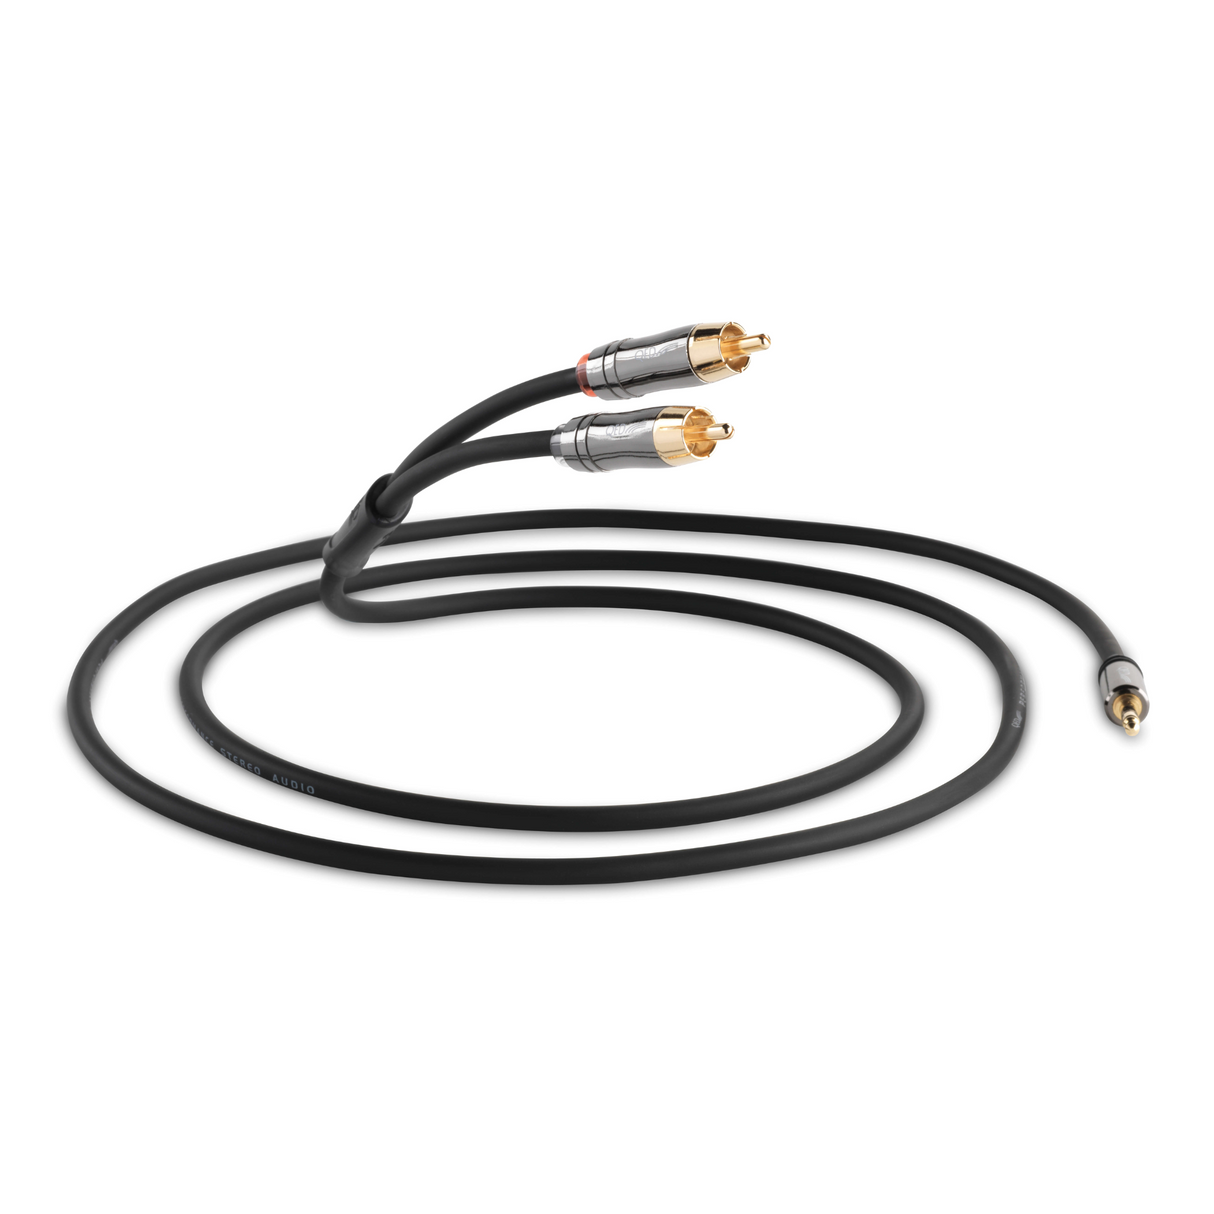 QED Performance Graphite J2P Jack to Phono Cable